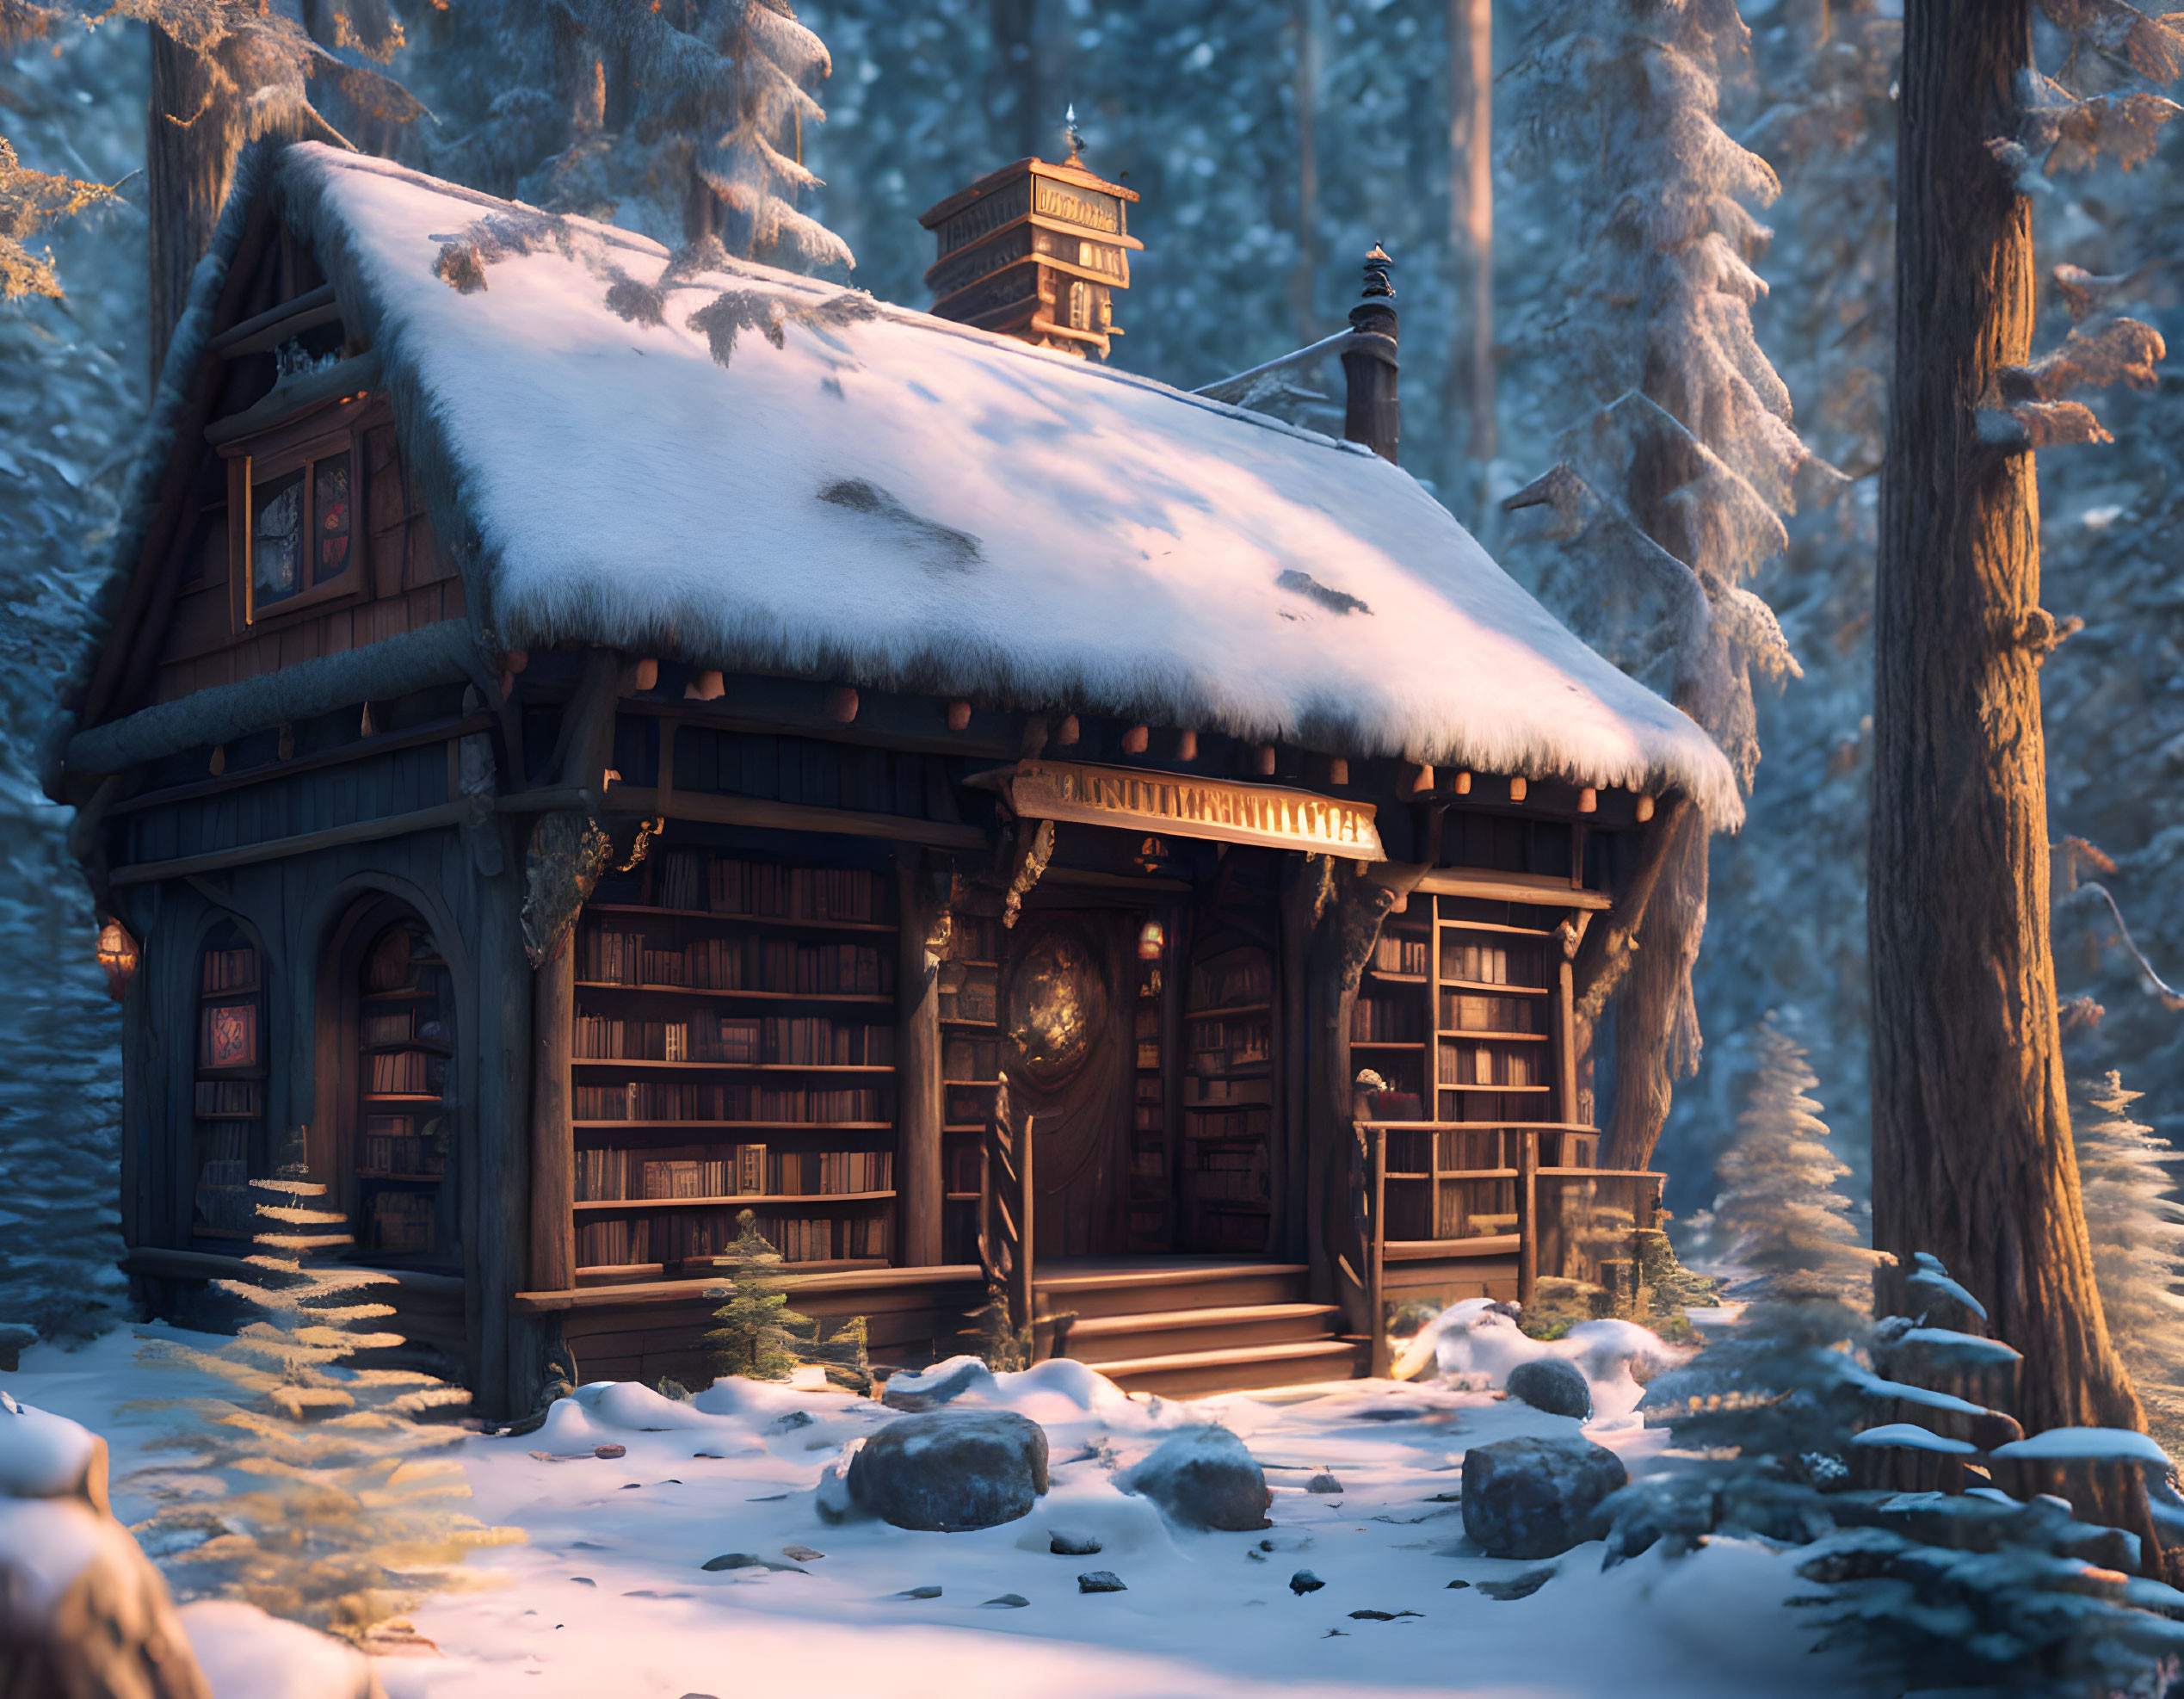 Magic book store in the forest in winter